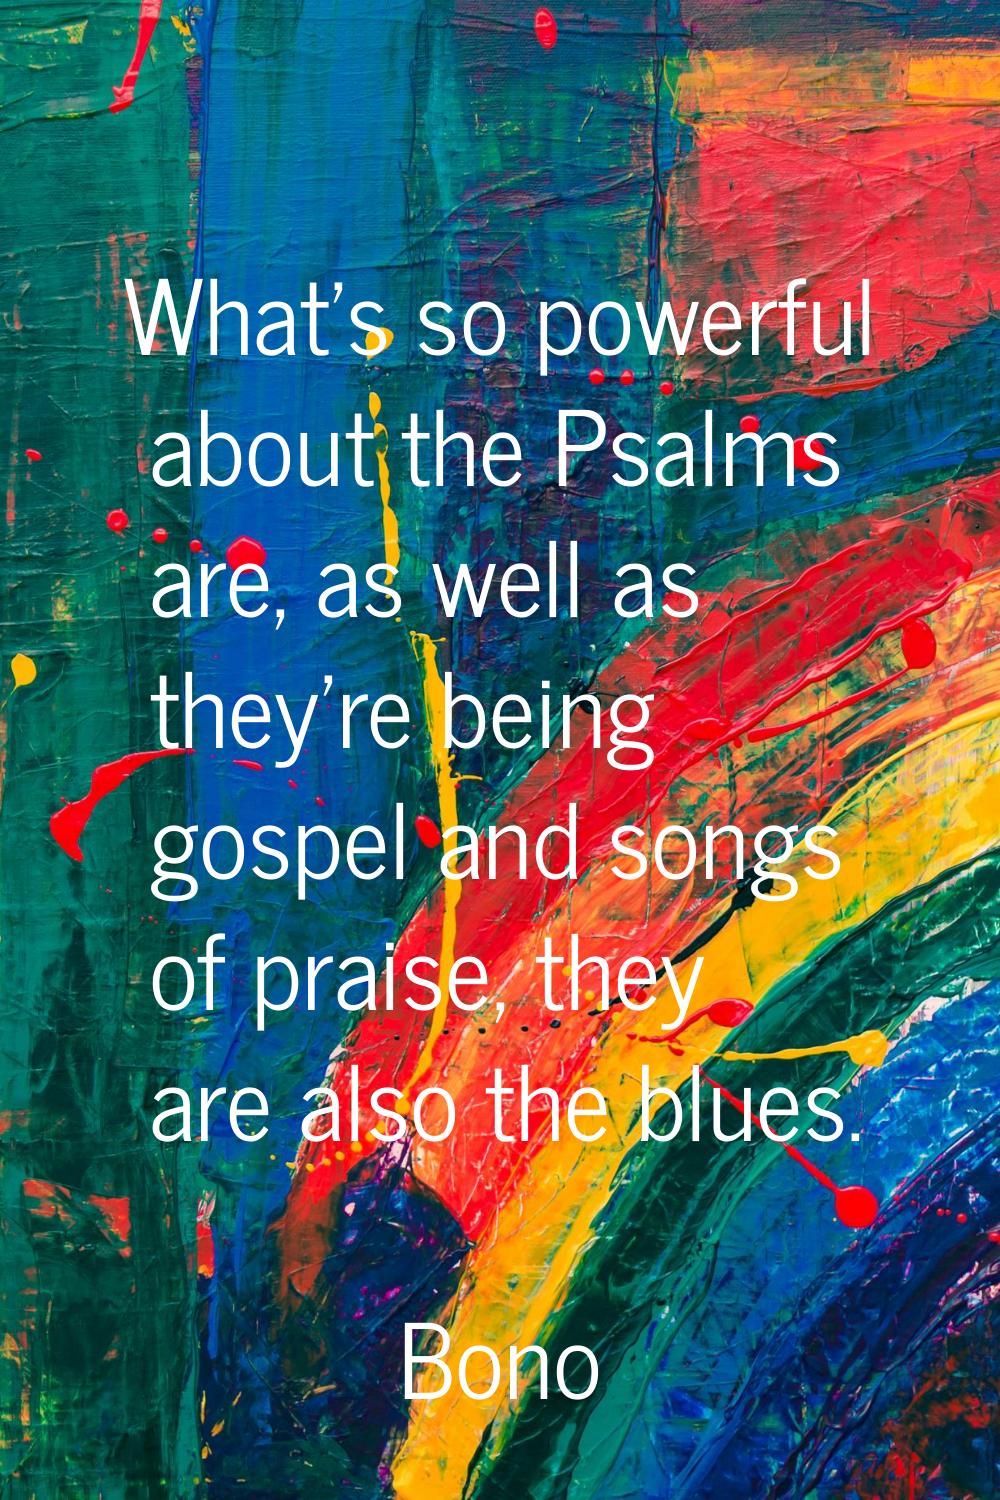 What's so powerful about the Psalms are, as well as they're being gospel and songs of praise, they 